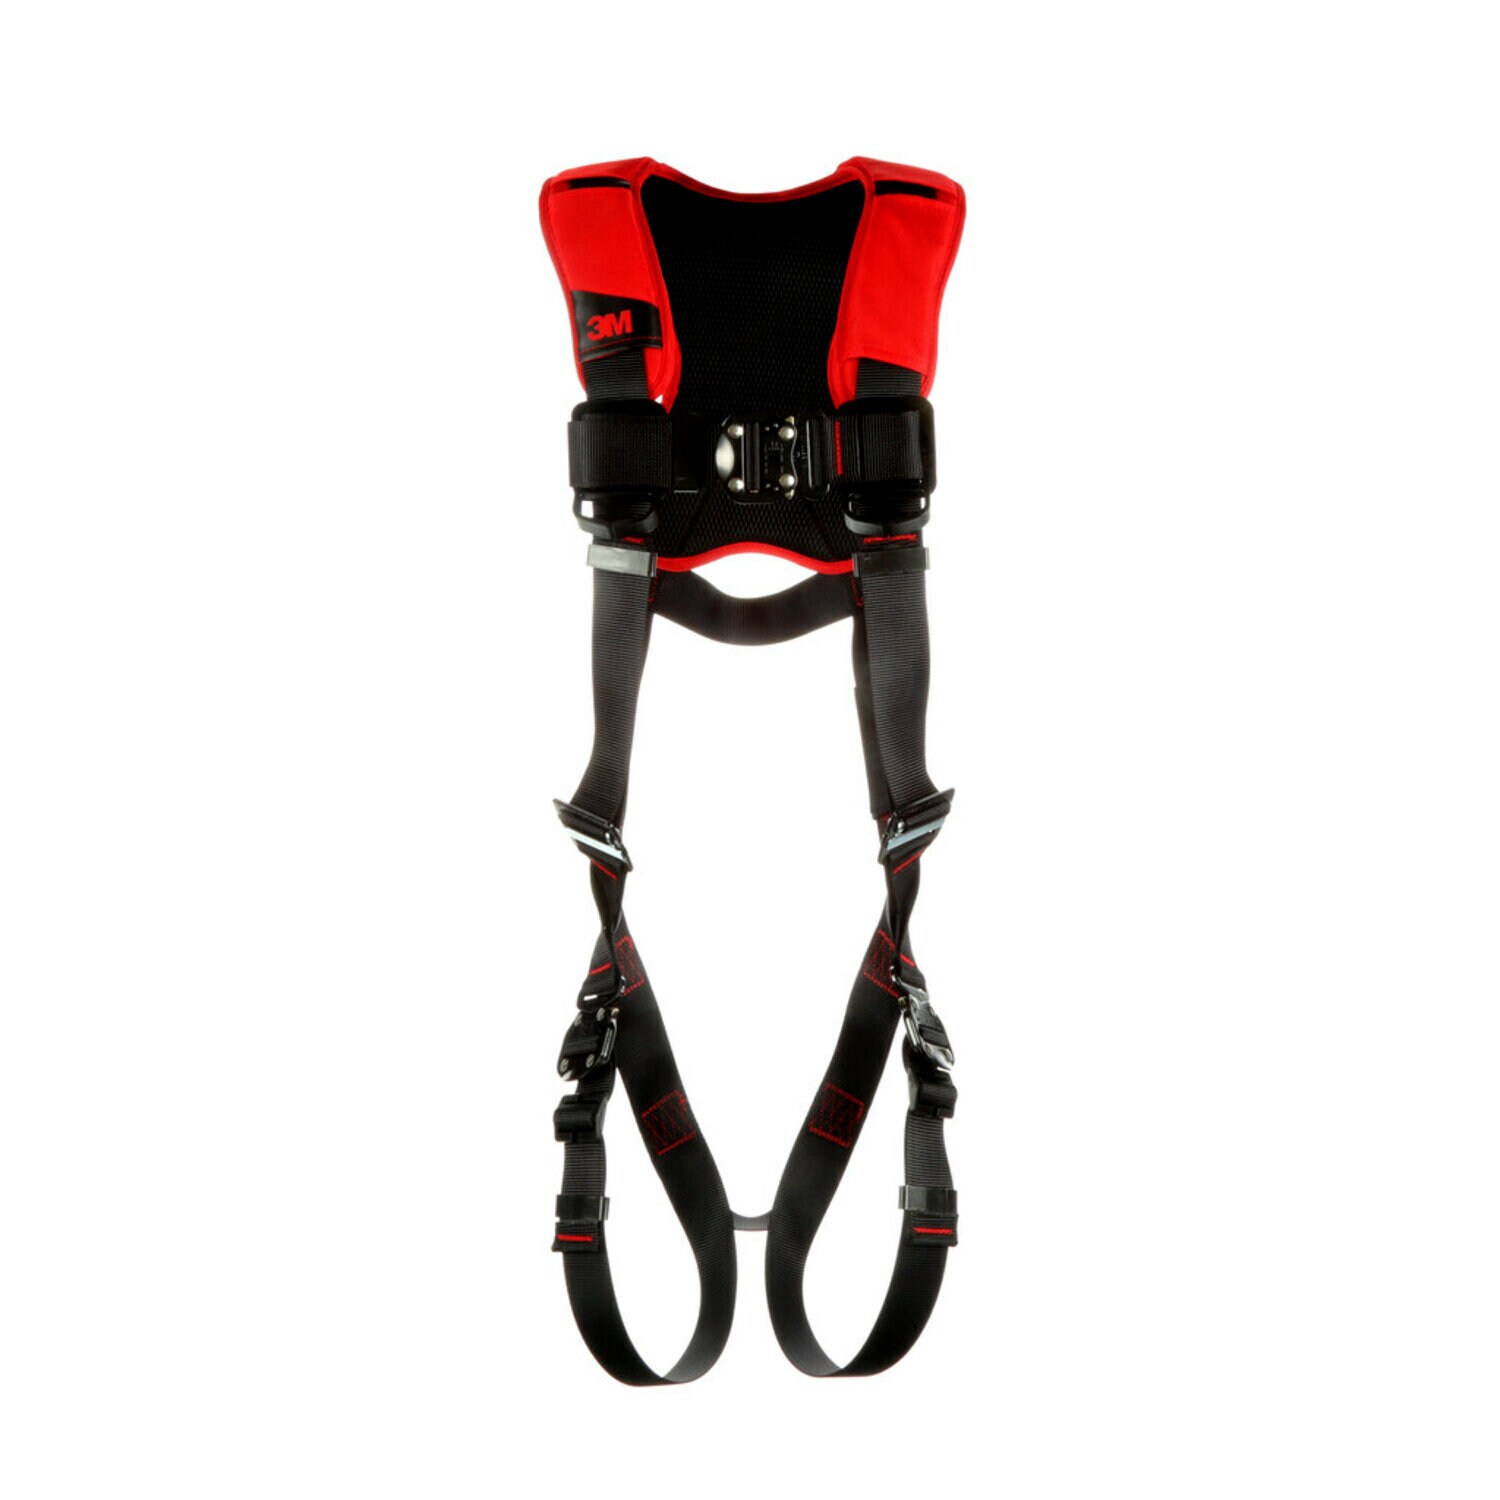 7012816702 - 3M Protecta P200 Comfort Vest Safety Harness 1161426, Small